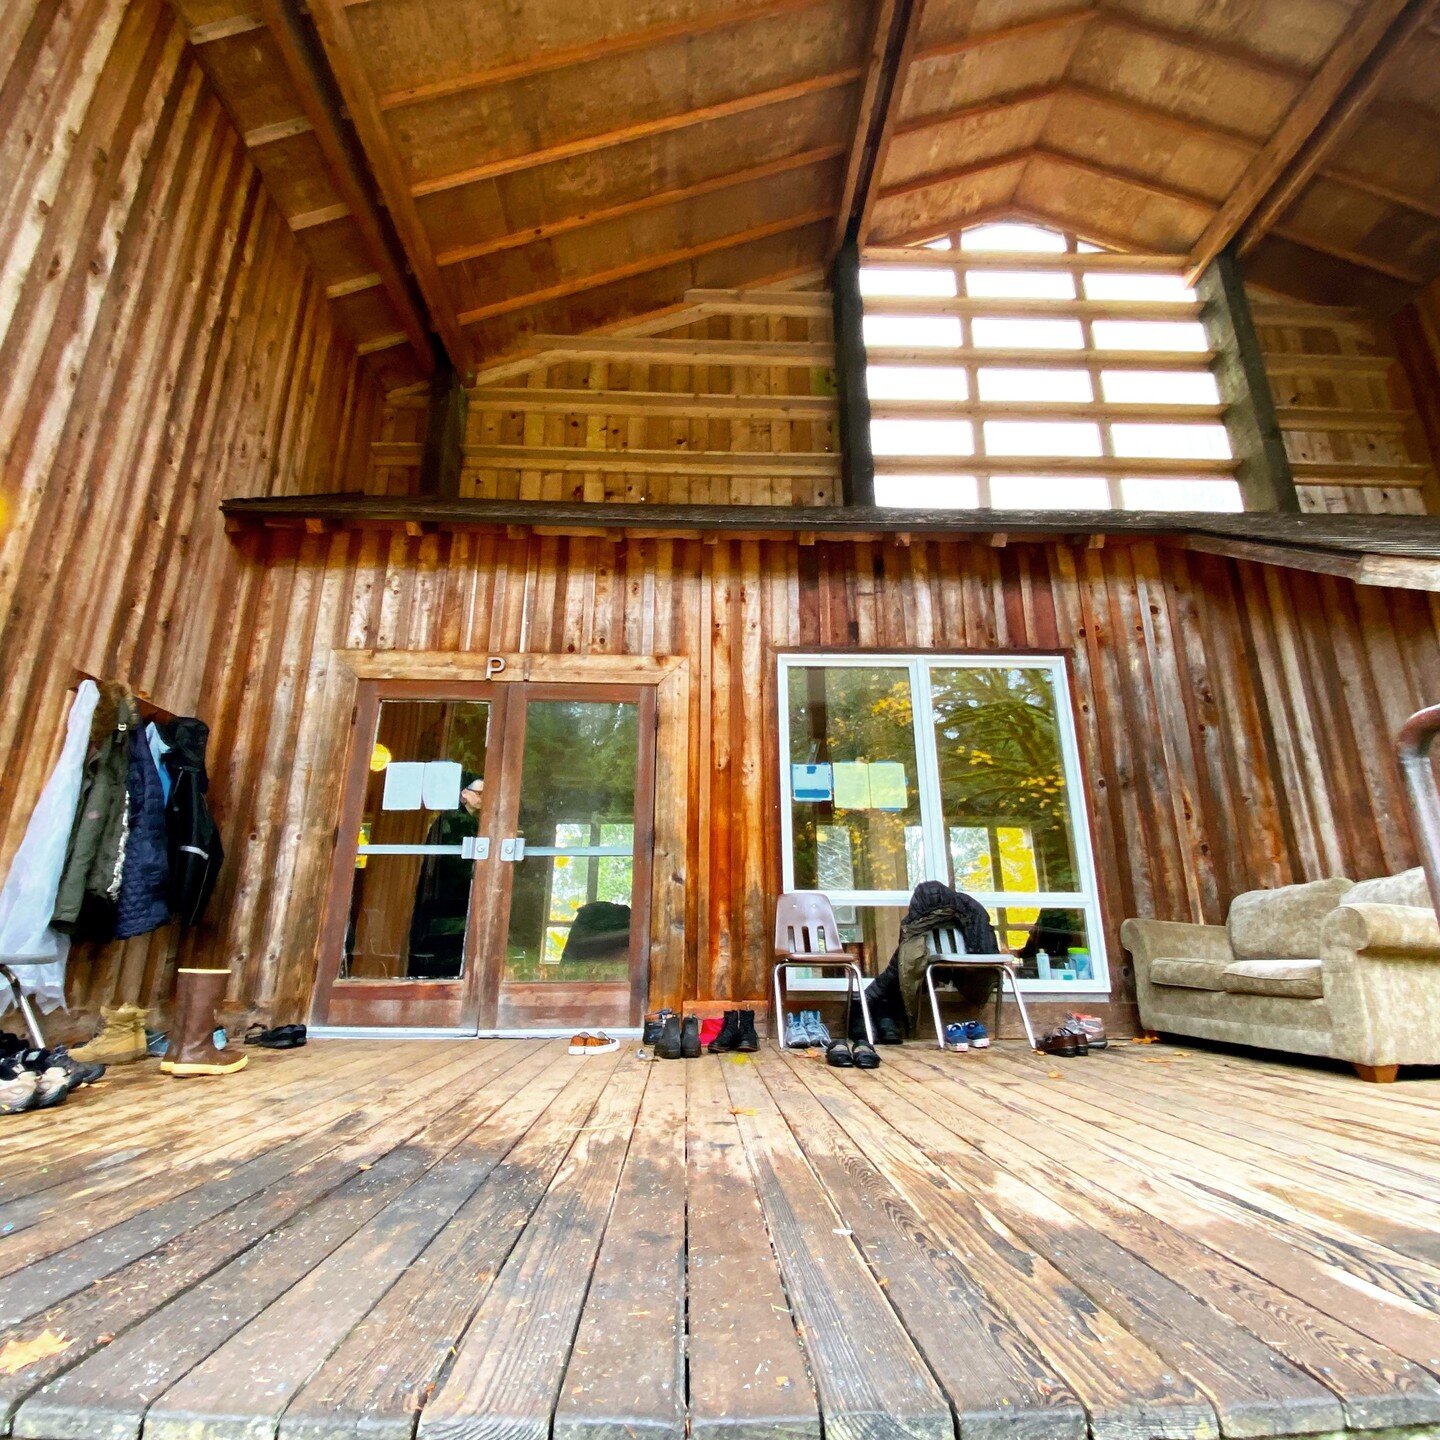 We have four places left on our April 12-15th Rebel Saints Silent Meditation Retreat- one spot in a mens cabin and three in a women&rsquo;s cabin. We will be practicing in this beautiful meditation hall on Vashon Island for the weekend. Rachael Savag